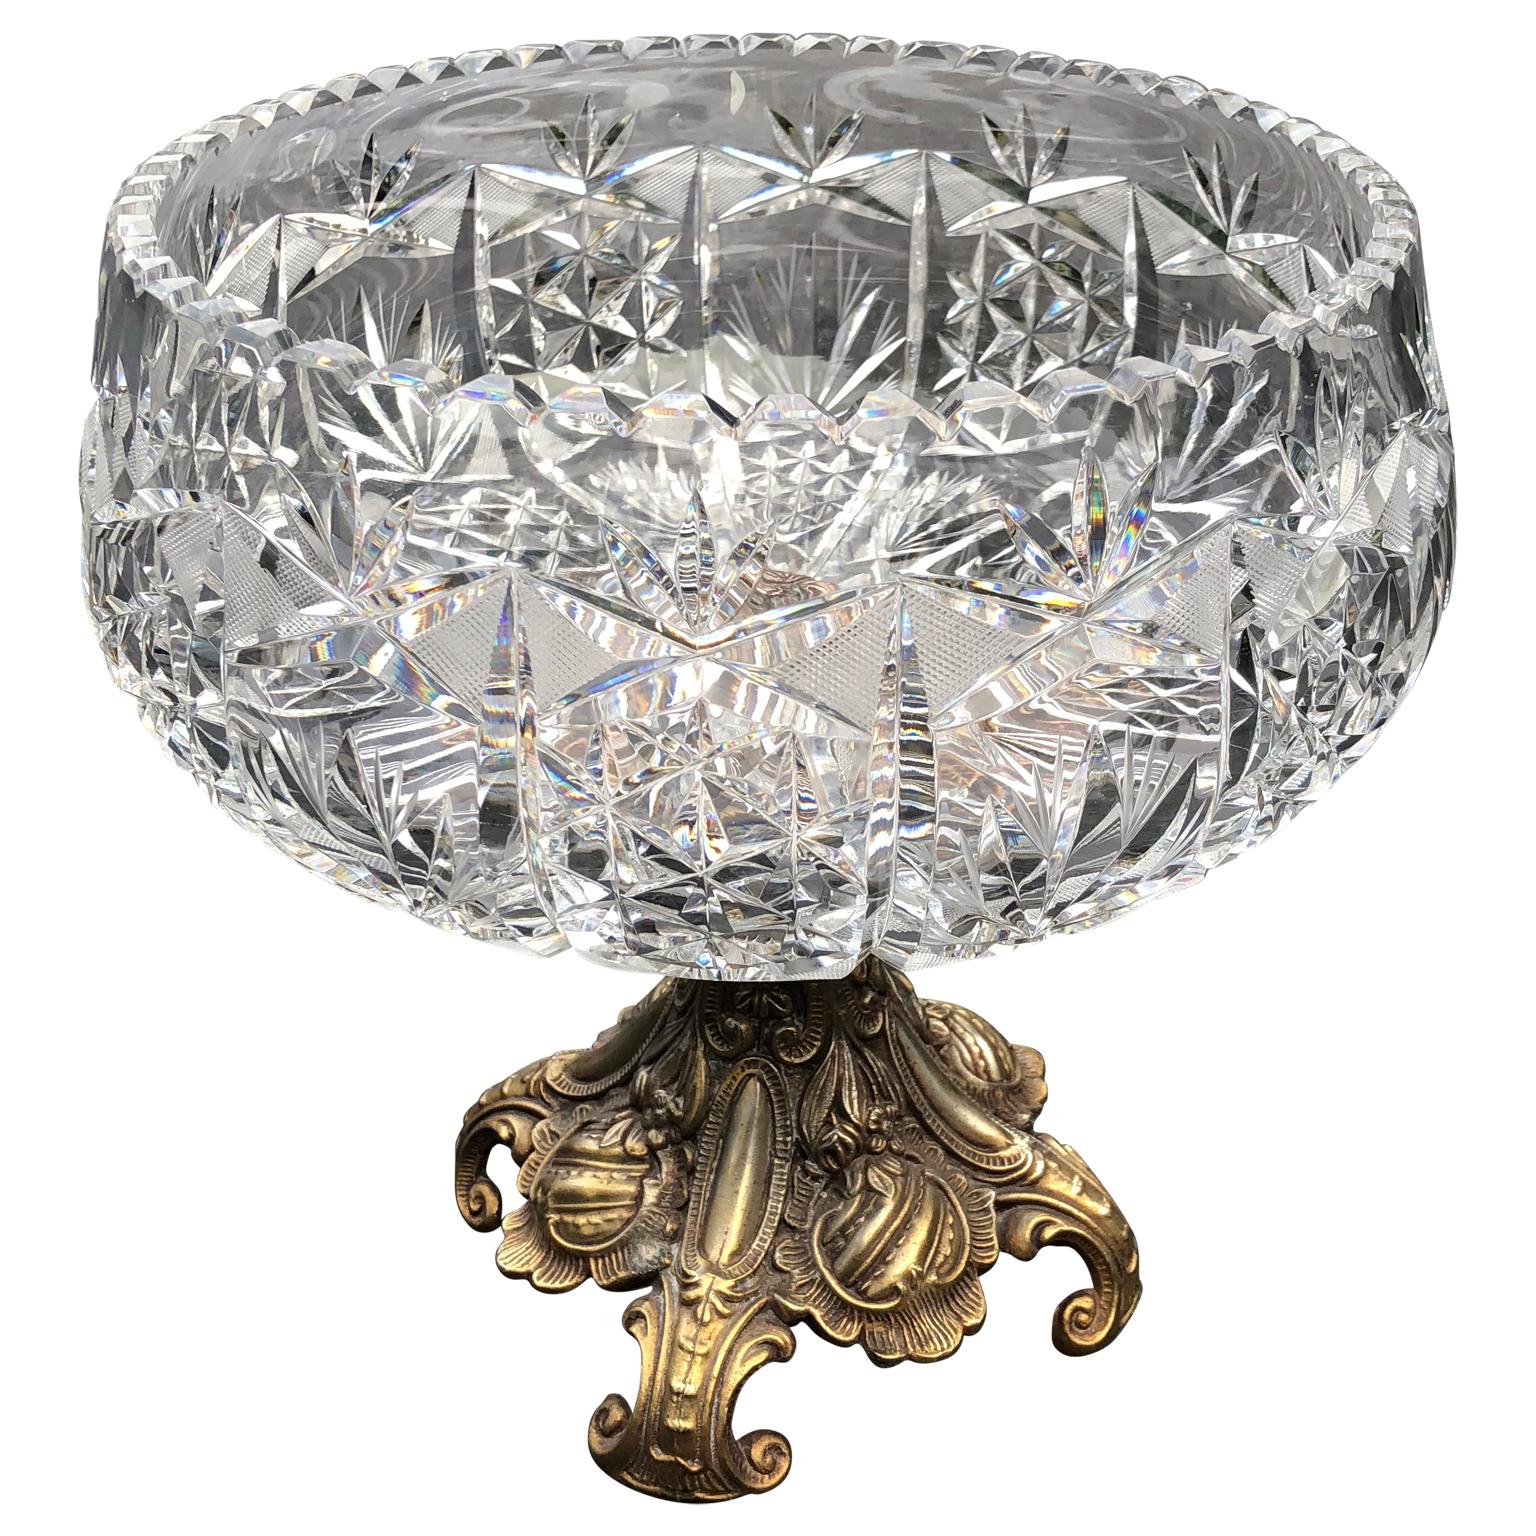 20th Century Large Crystal Centerbowl On Rococo-style Bronze Stand